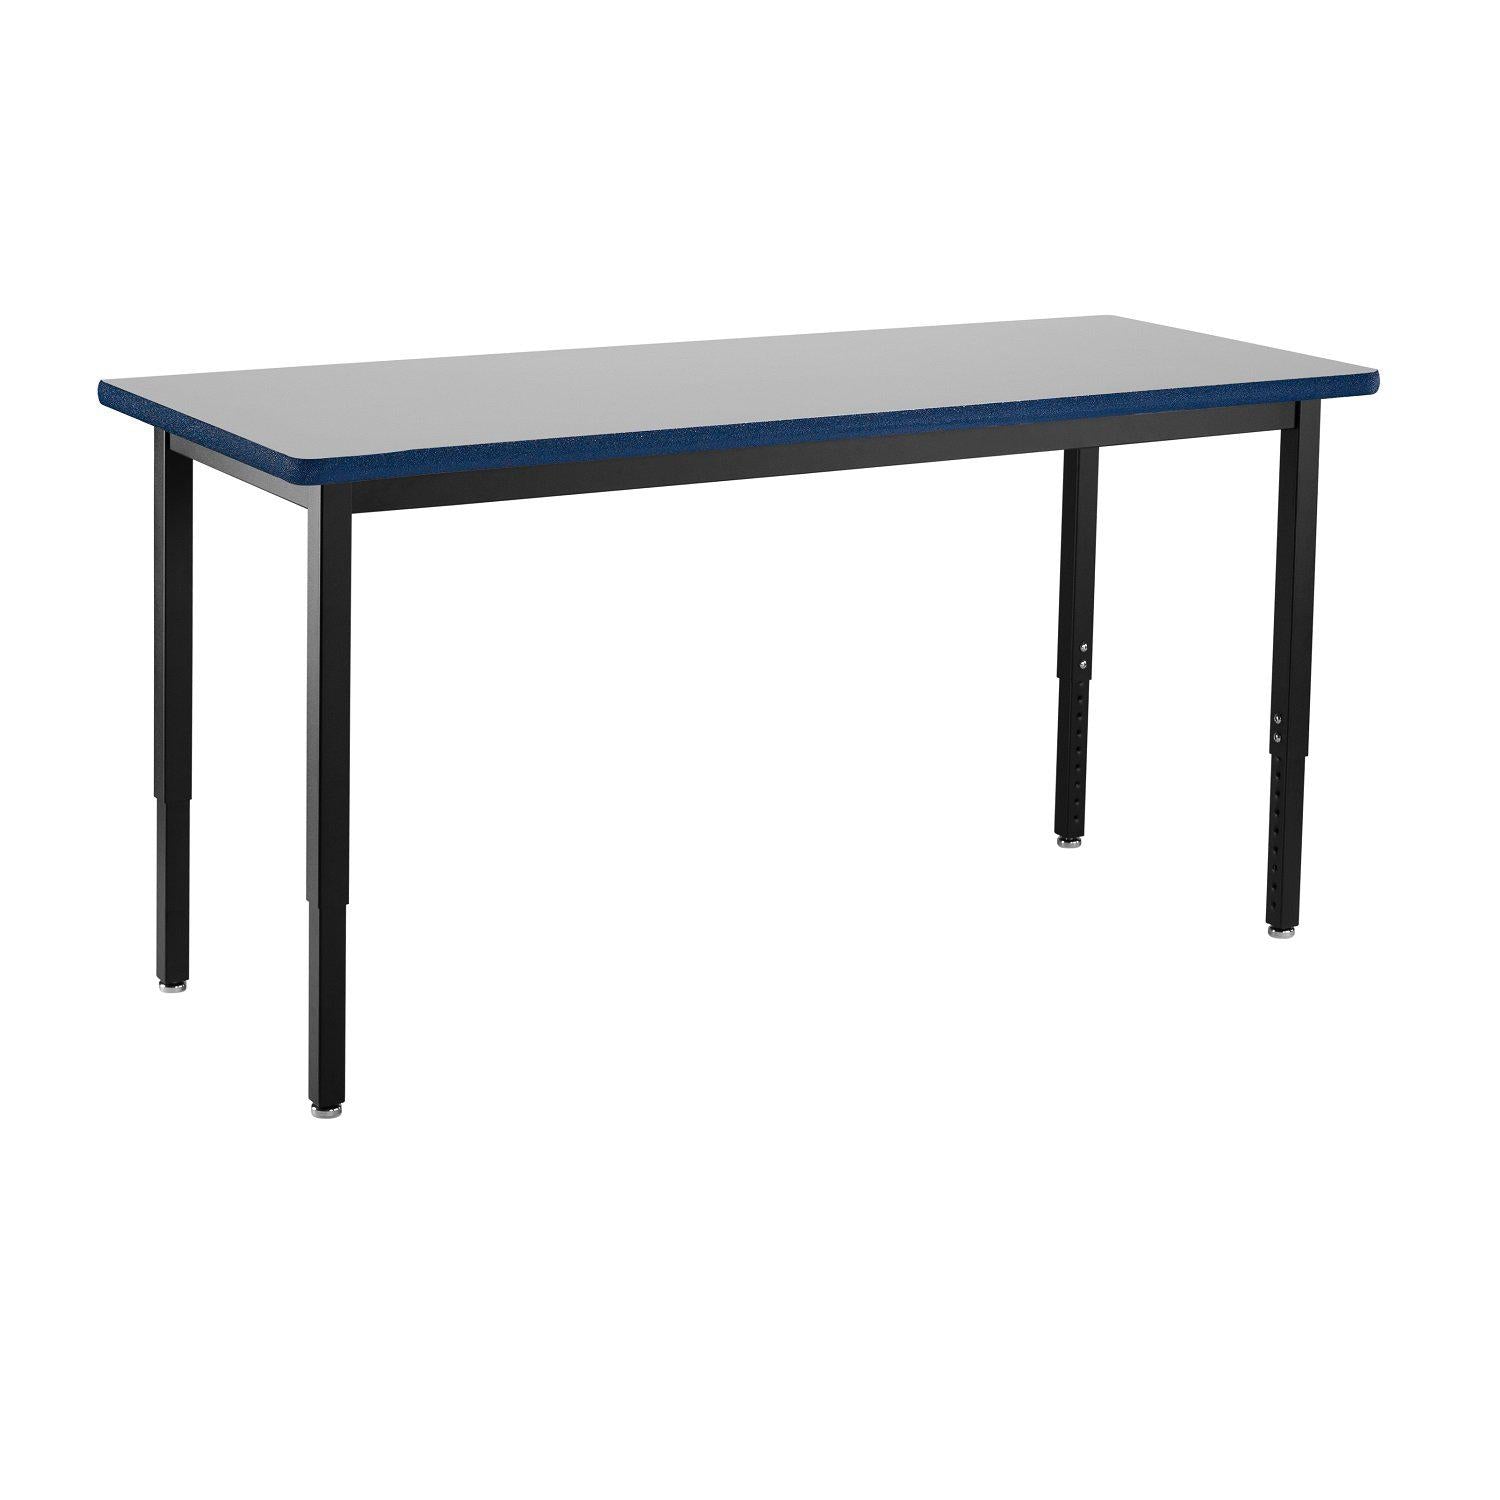 Heavy-Duty Height-Adjustable Utility Table, Black Frame, 30" x 48", Supreme High-Pressure Laminate Top with Black ProtectEdge